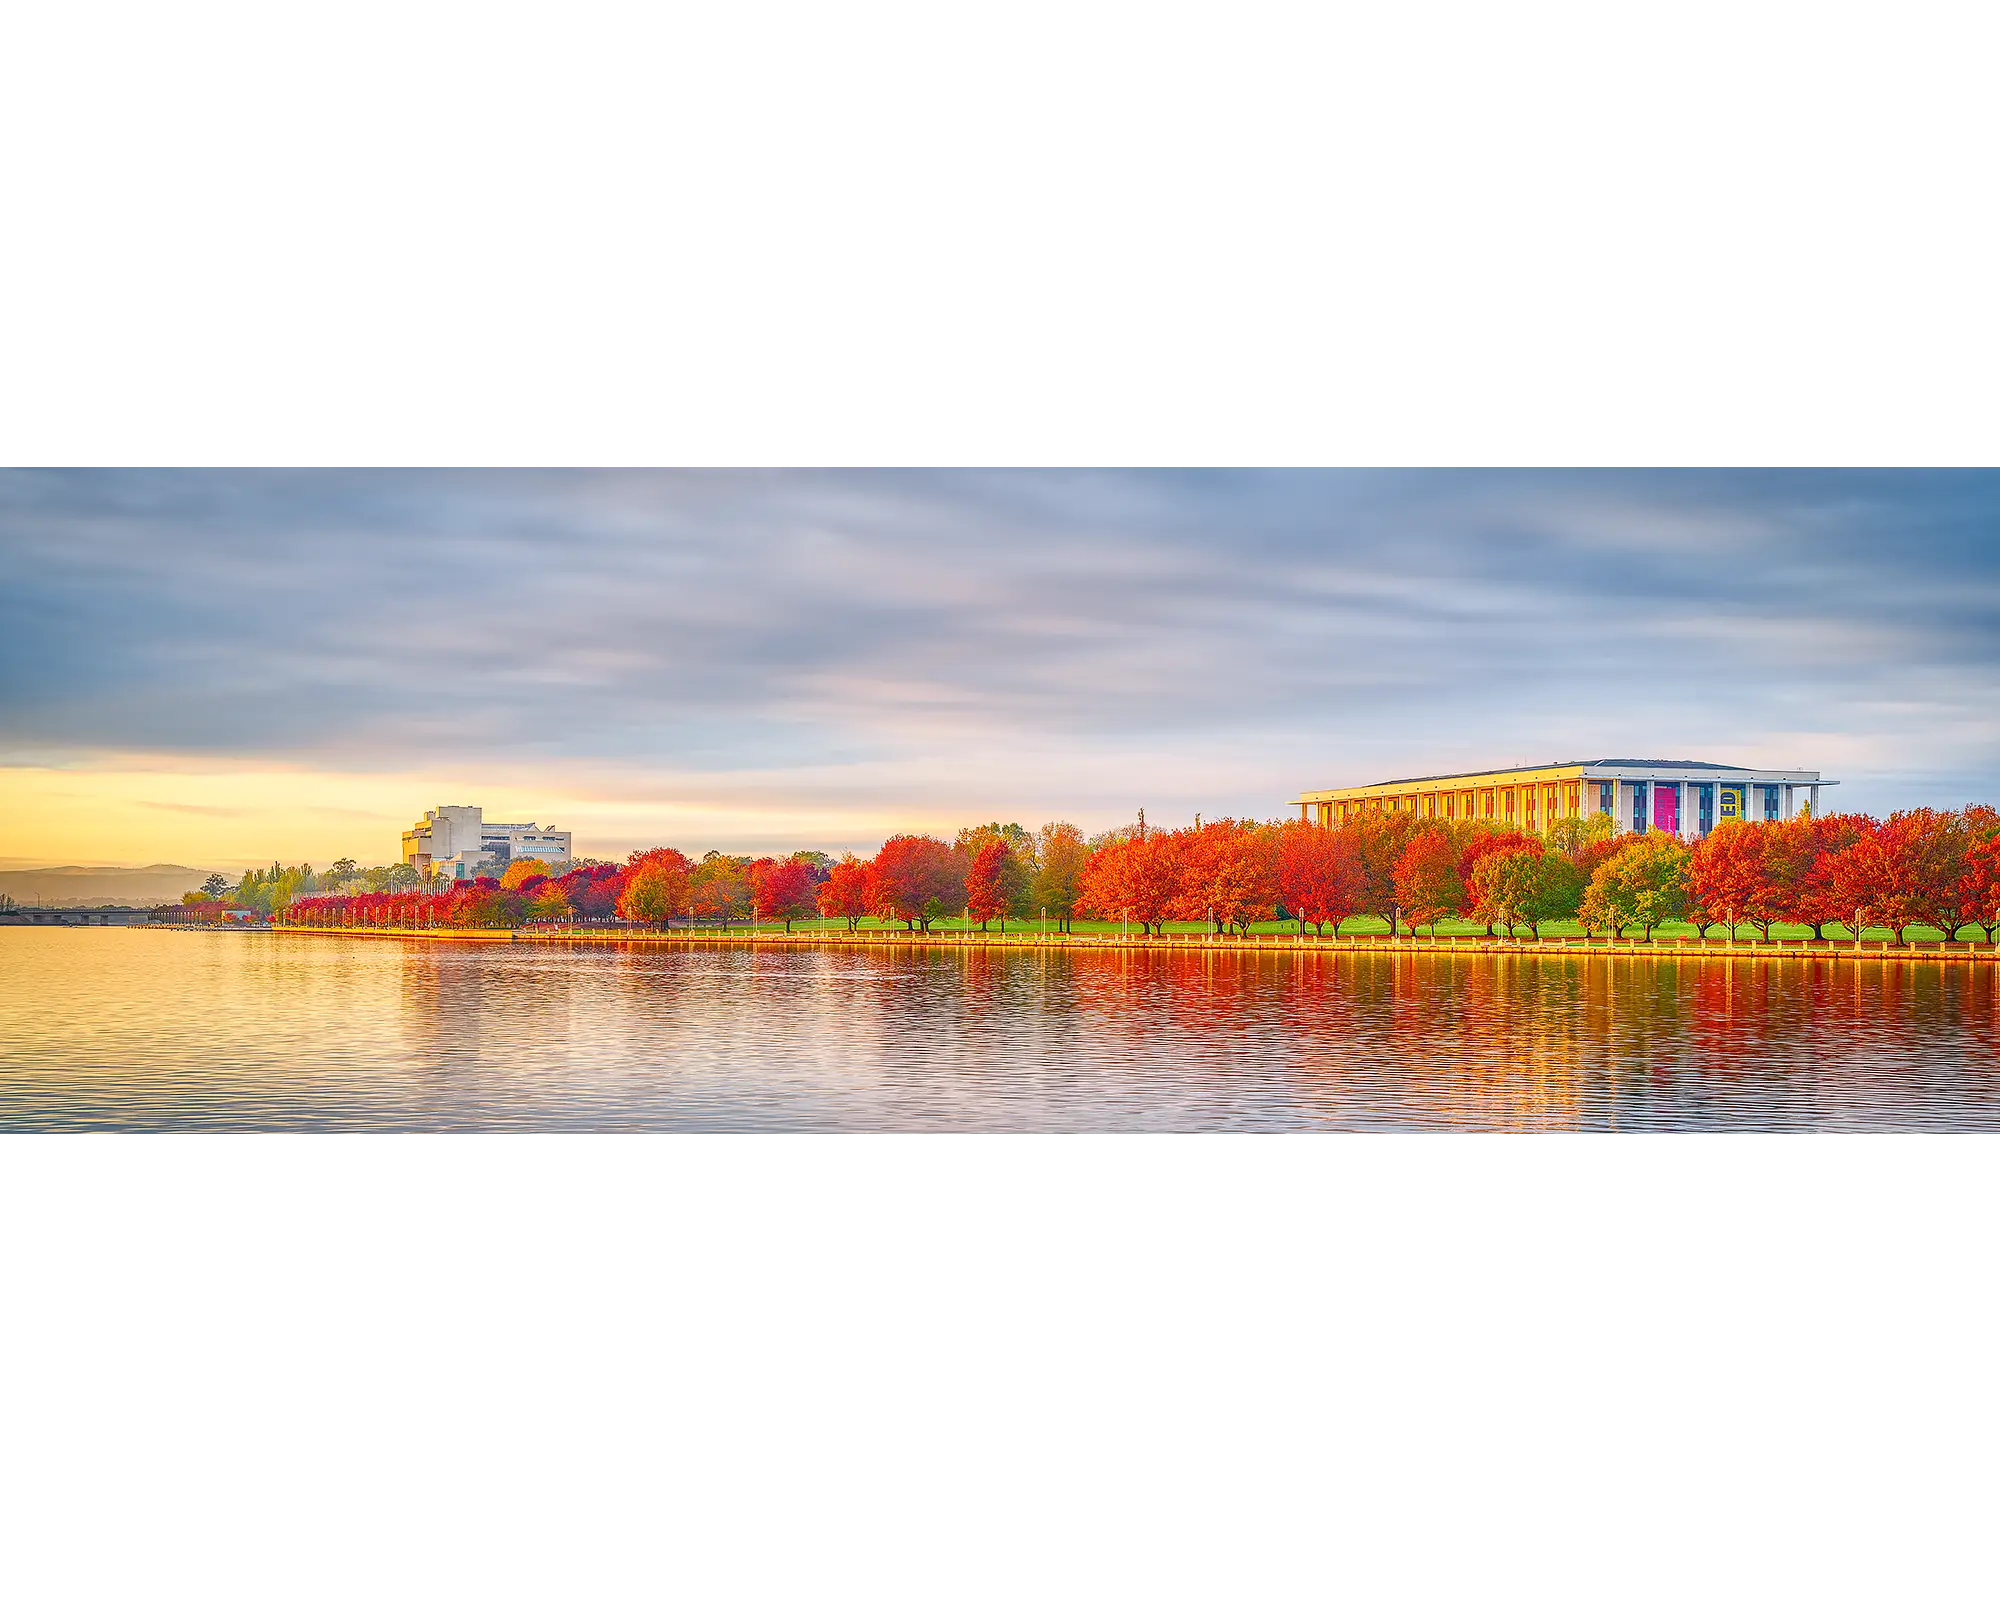 Outlook - sunrise with autumn colours, National Library and High Court, Lake Burley Griffin, Canberra.